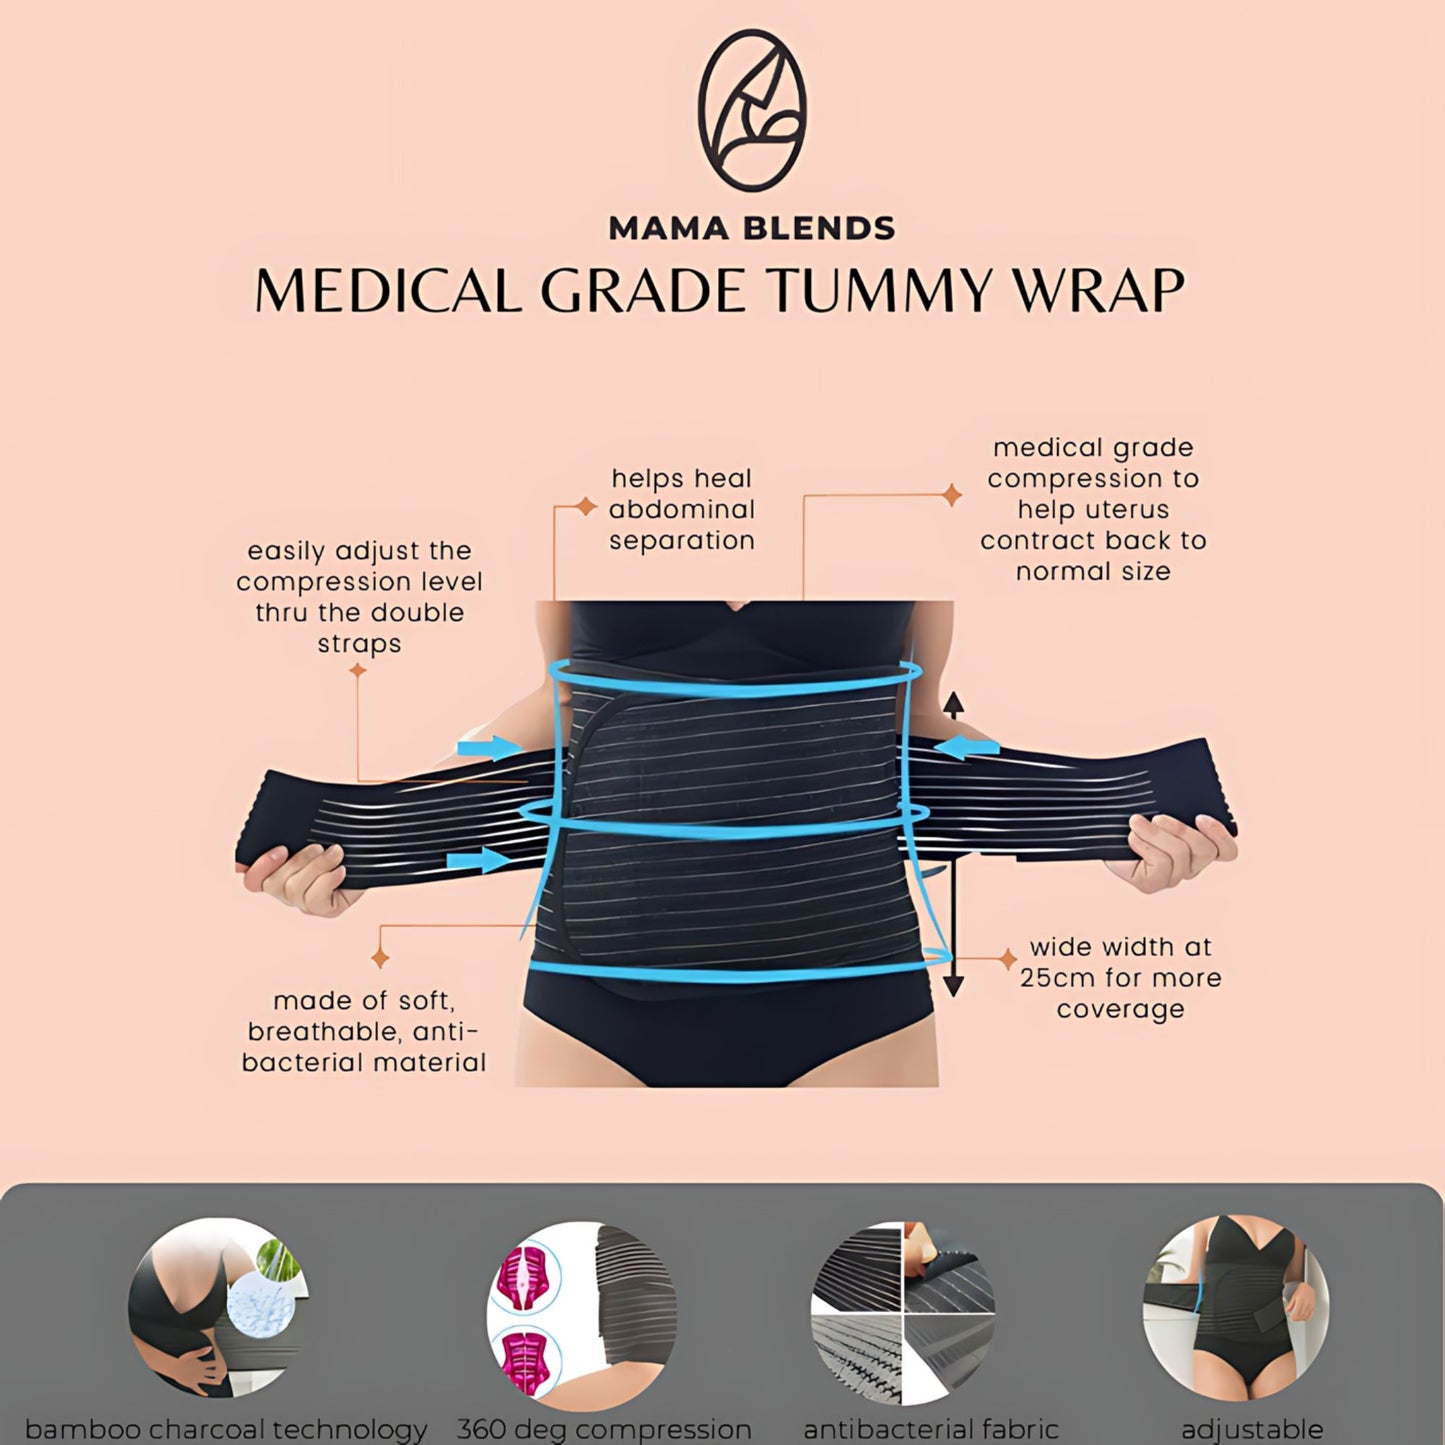 Lunabebe by Mama Blends Medical Grade Tummy Wrap Bamboo Charcoal Support Binder I Suitable for any post-operation recovery, Has medical grade 360deg compression, Can cover the incision area of CS moms